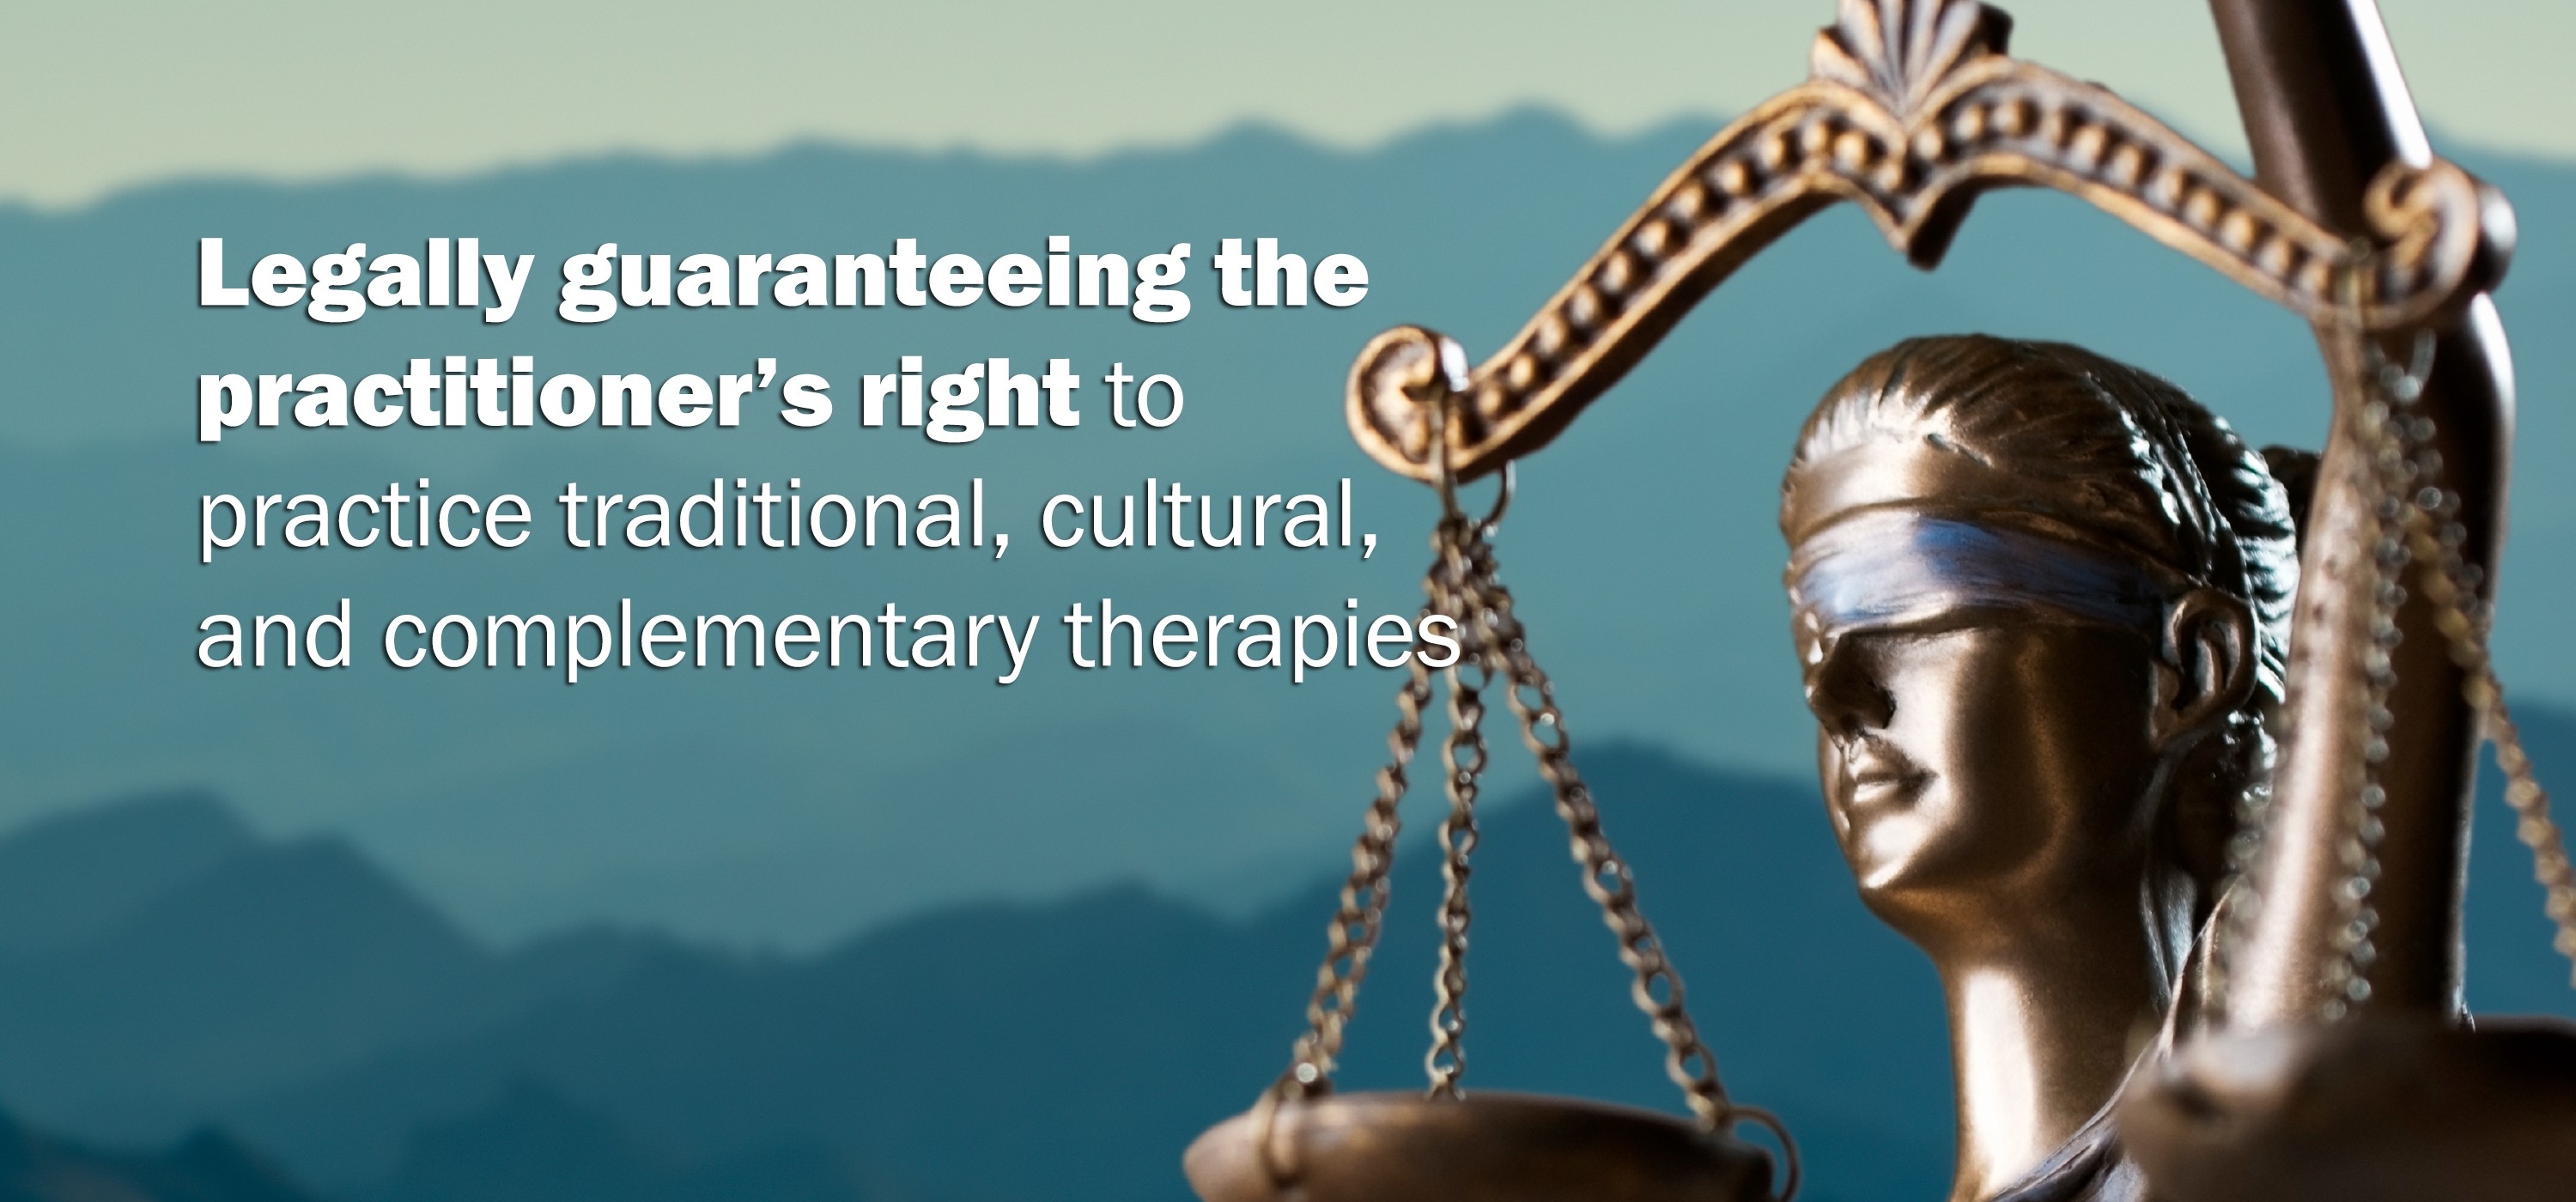 Legally guaranteeing the practitioner's right to practice traditional, cultural, and complementary therapies